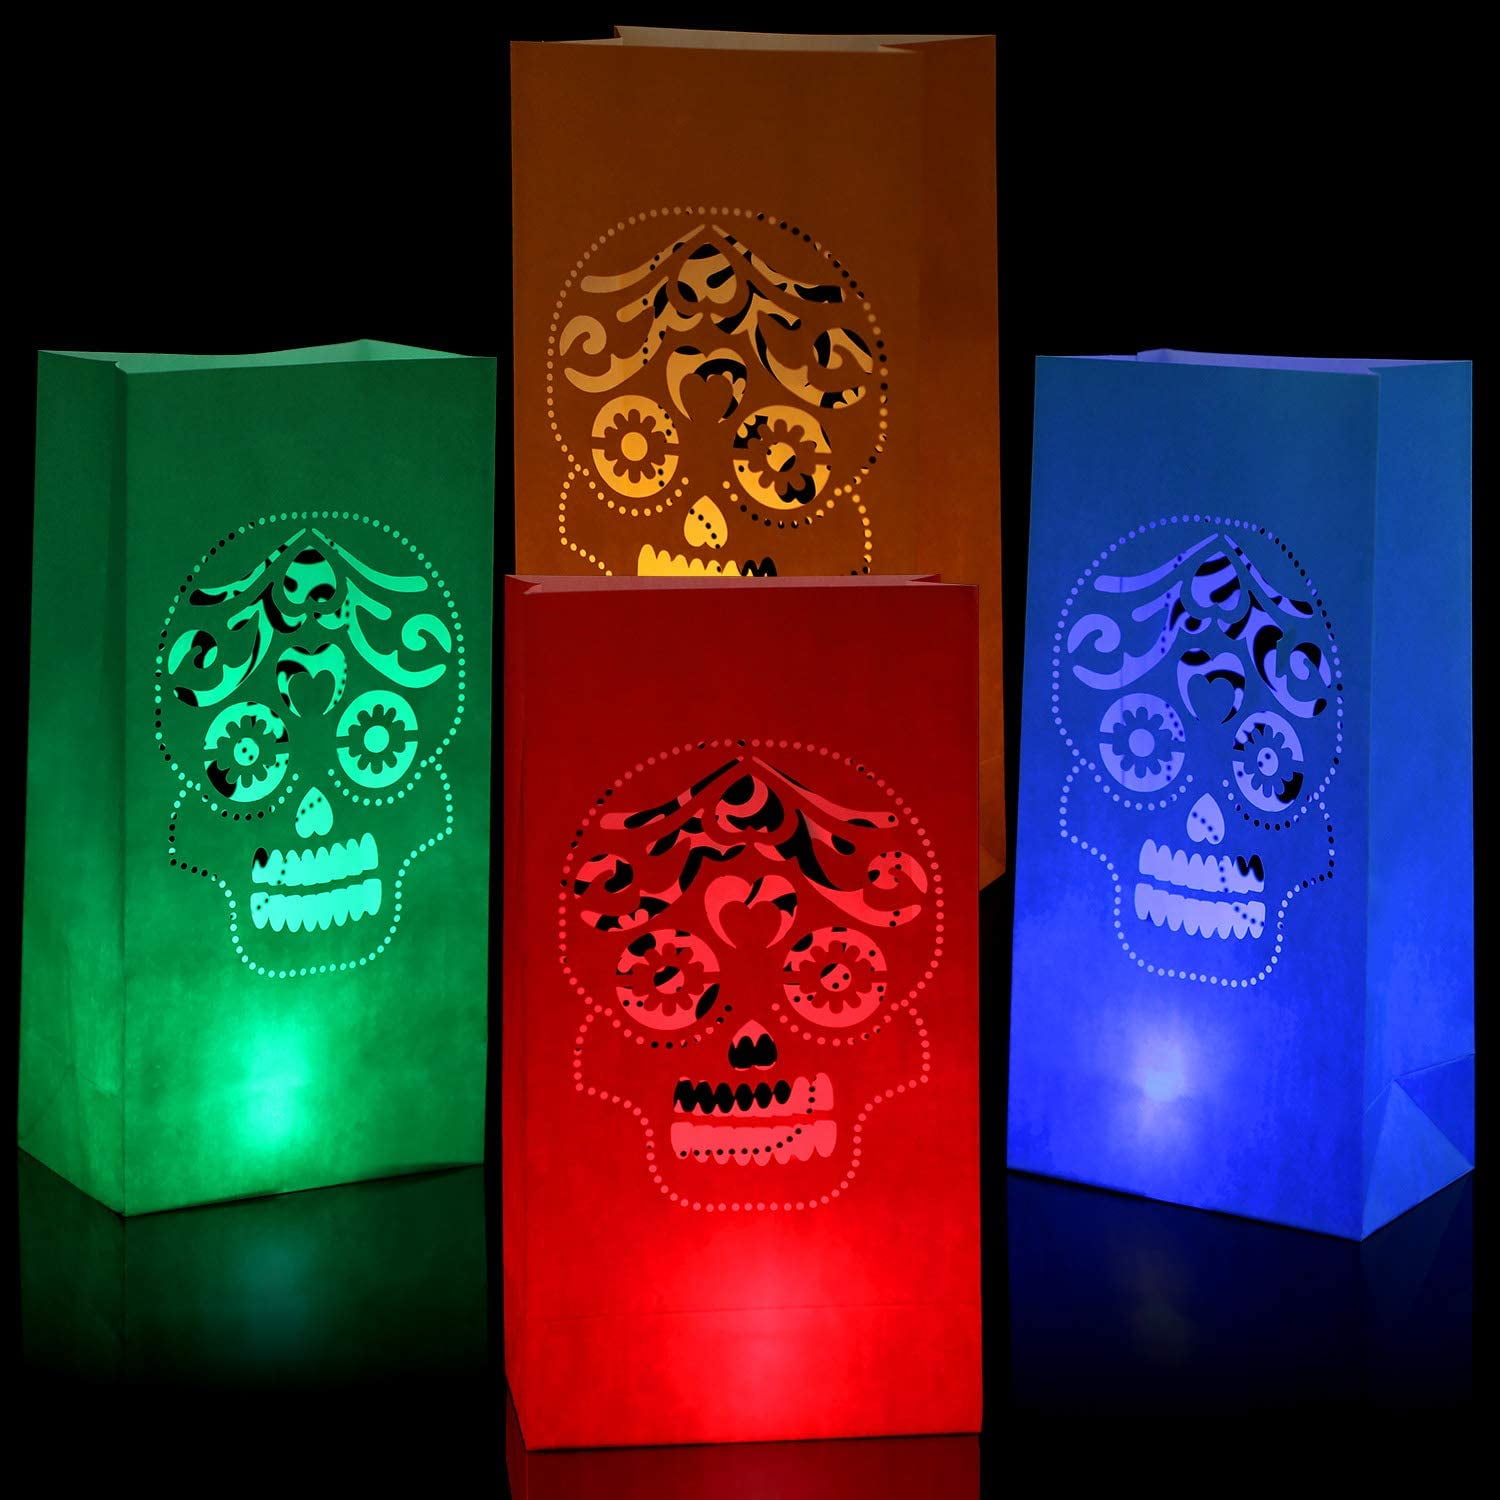 16 Pieces Day of The Dead Luminary Bag Halloween Luminary Bags Candle Luminary Bags Paper Luminary Bags for Day of The Dead Halloween Wedding Party Decoration 